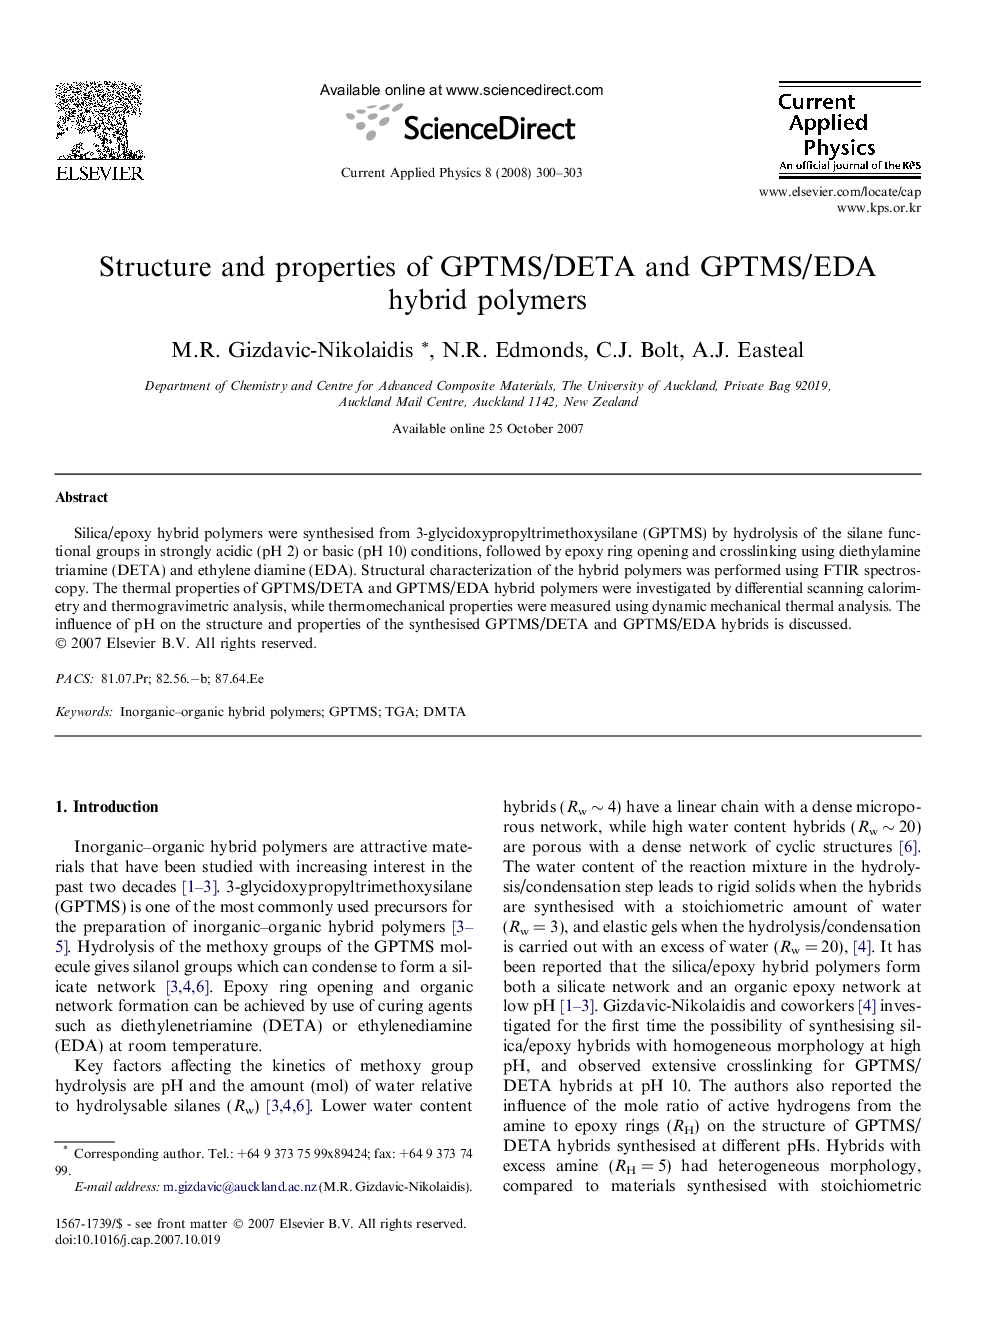 Structure and properties of GPTMS/DETA and GPTMS/EDA hybrid polymers